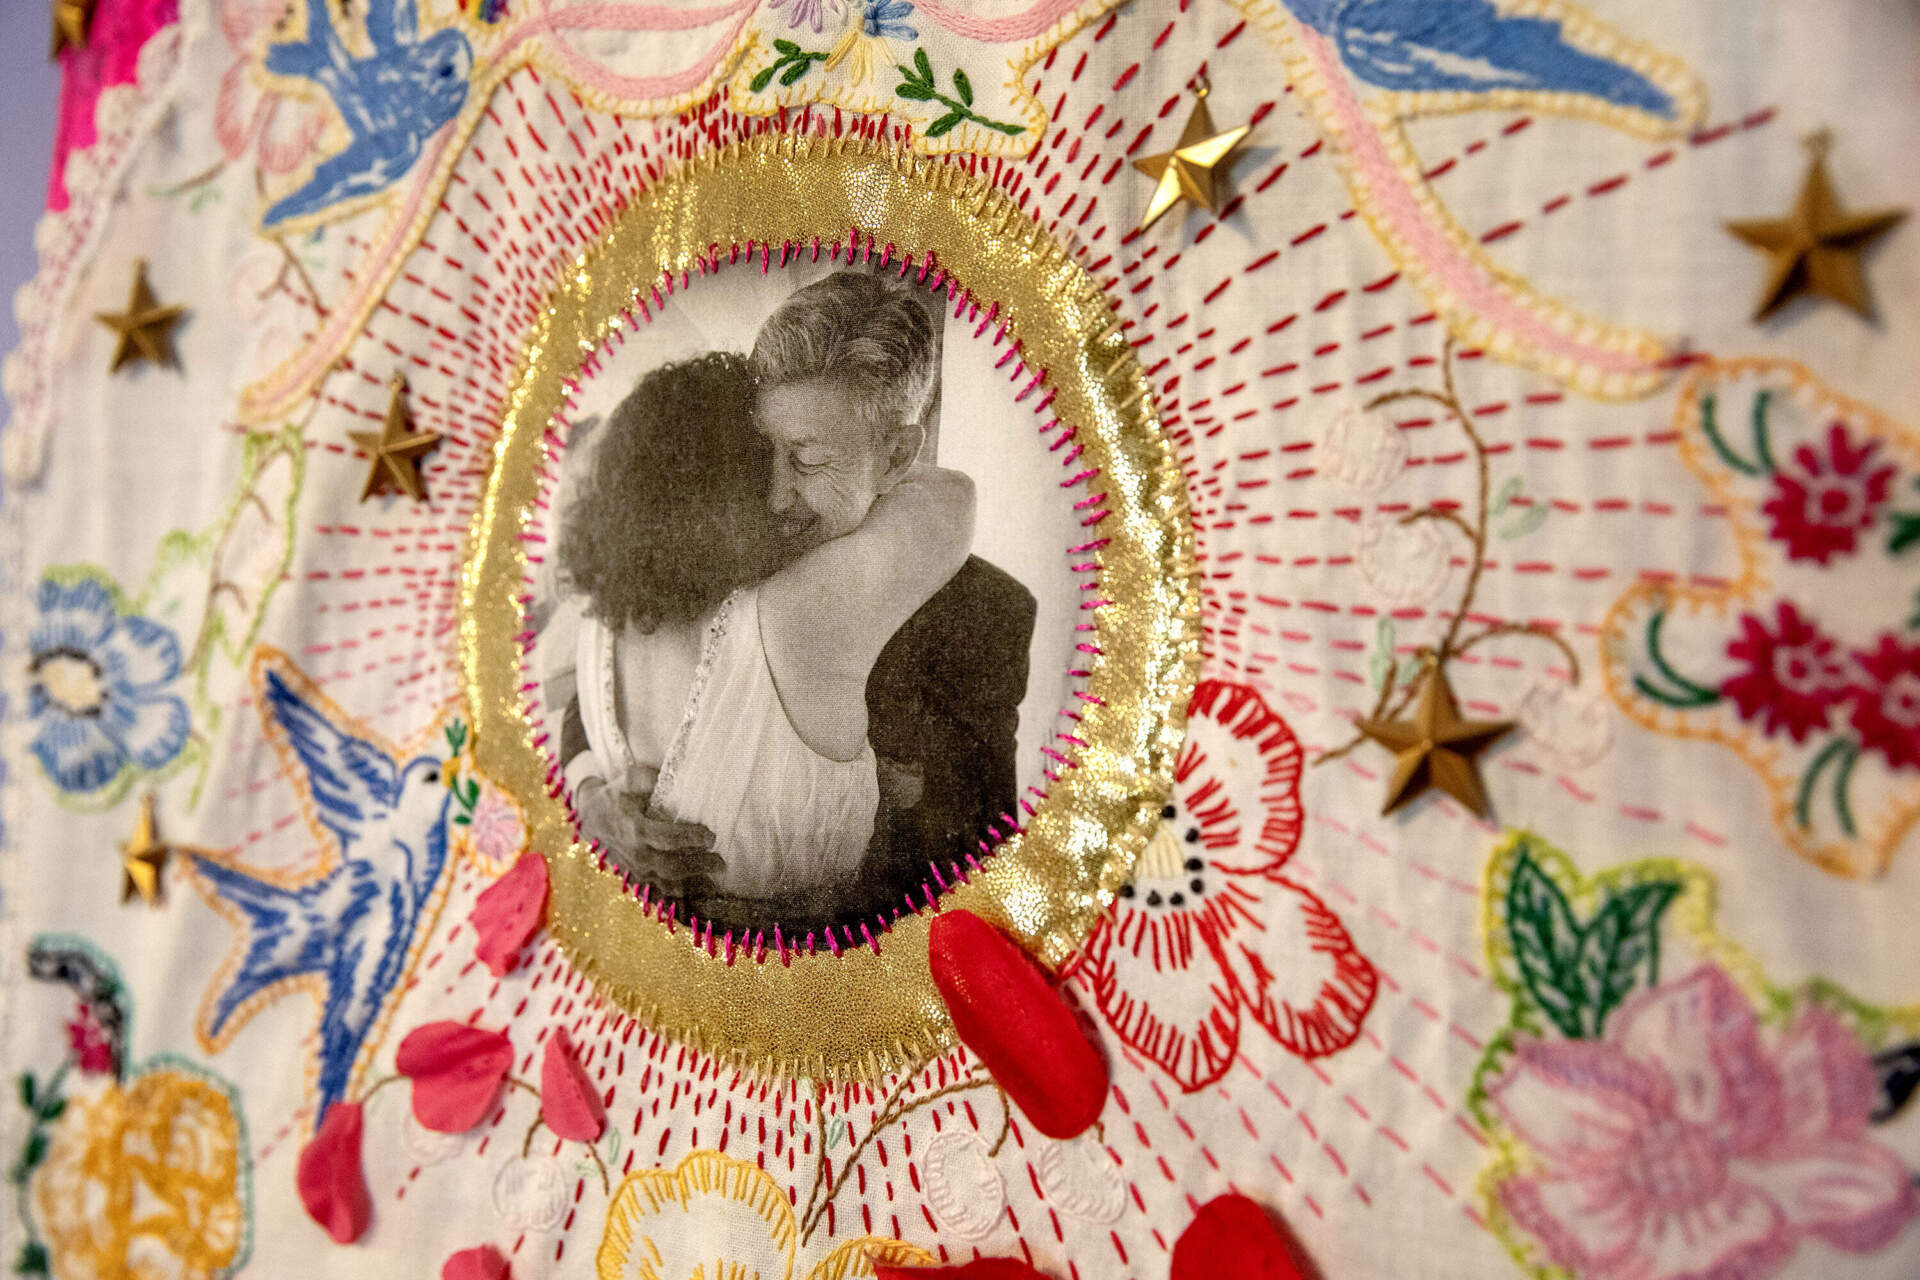 Fabric art by Liz Nania, with an image from her wedding day. (Robin Lubbock/WBUR)